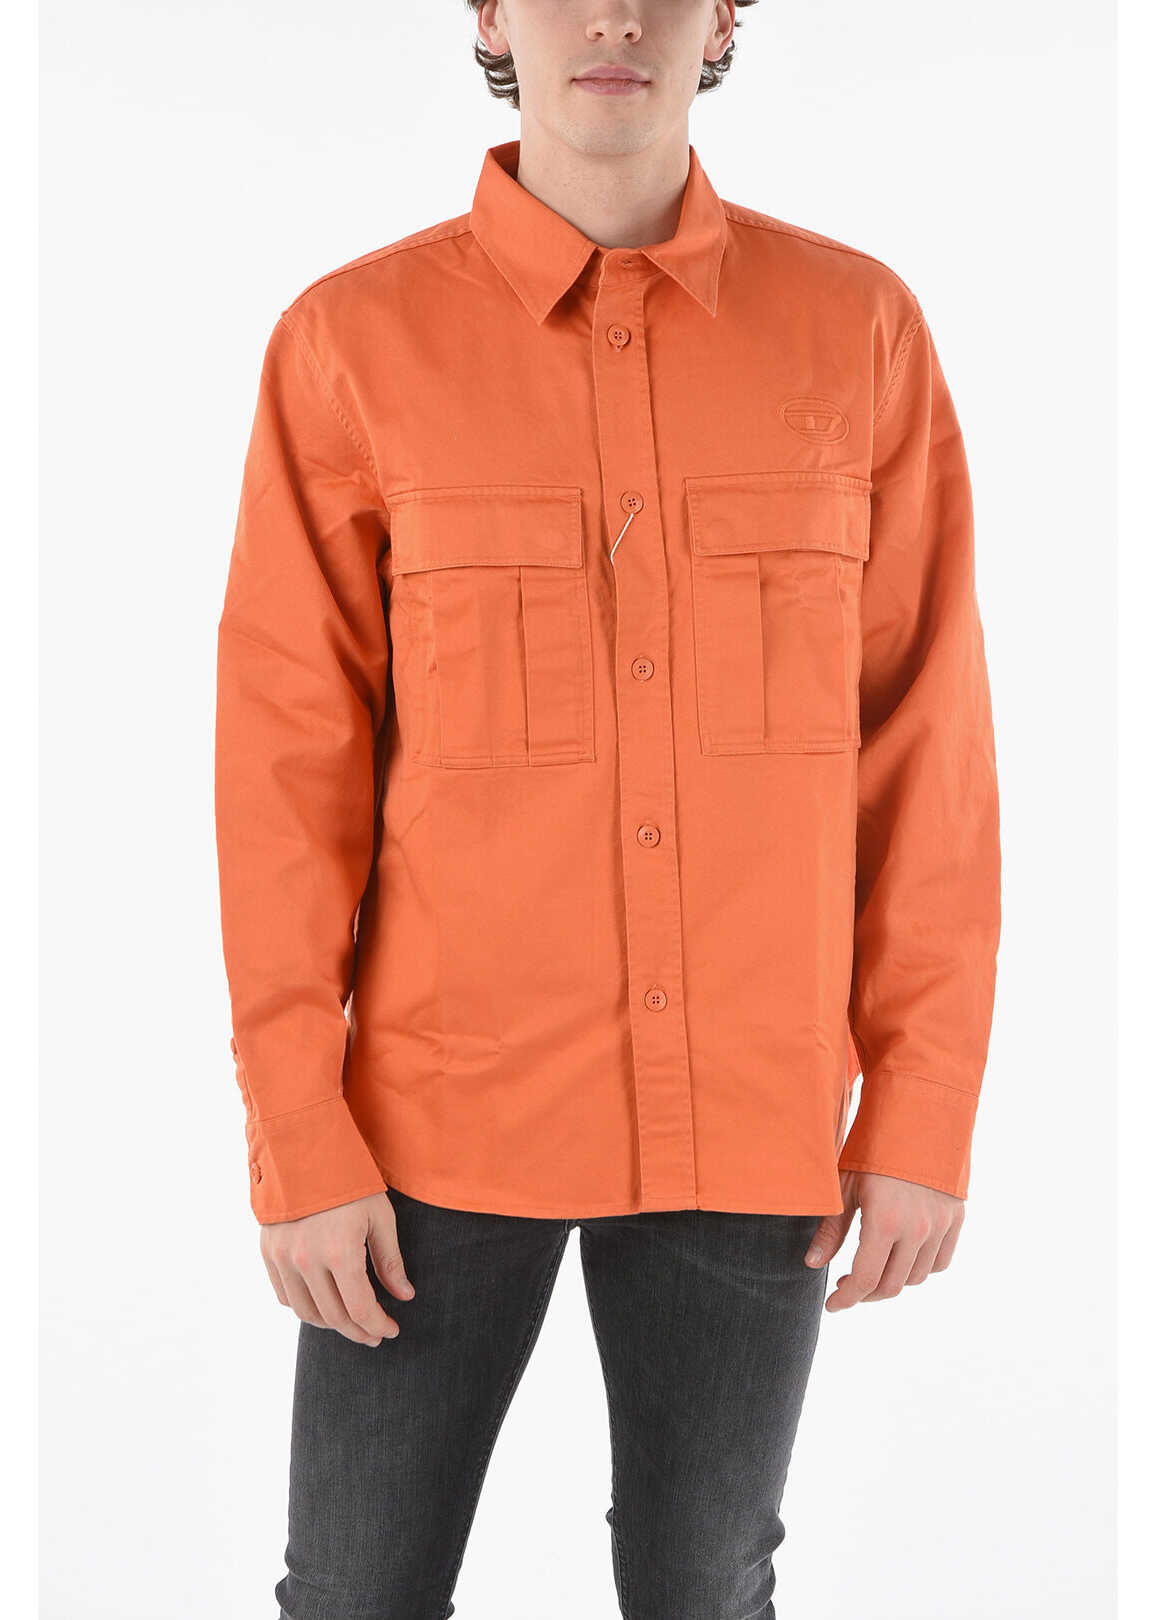 Diesel Cotton S-Roow Overshirt With Back Pocket Orange